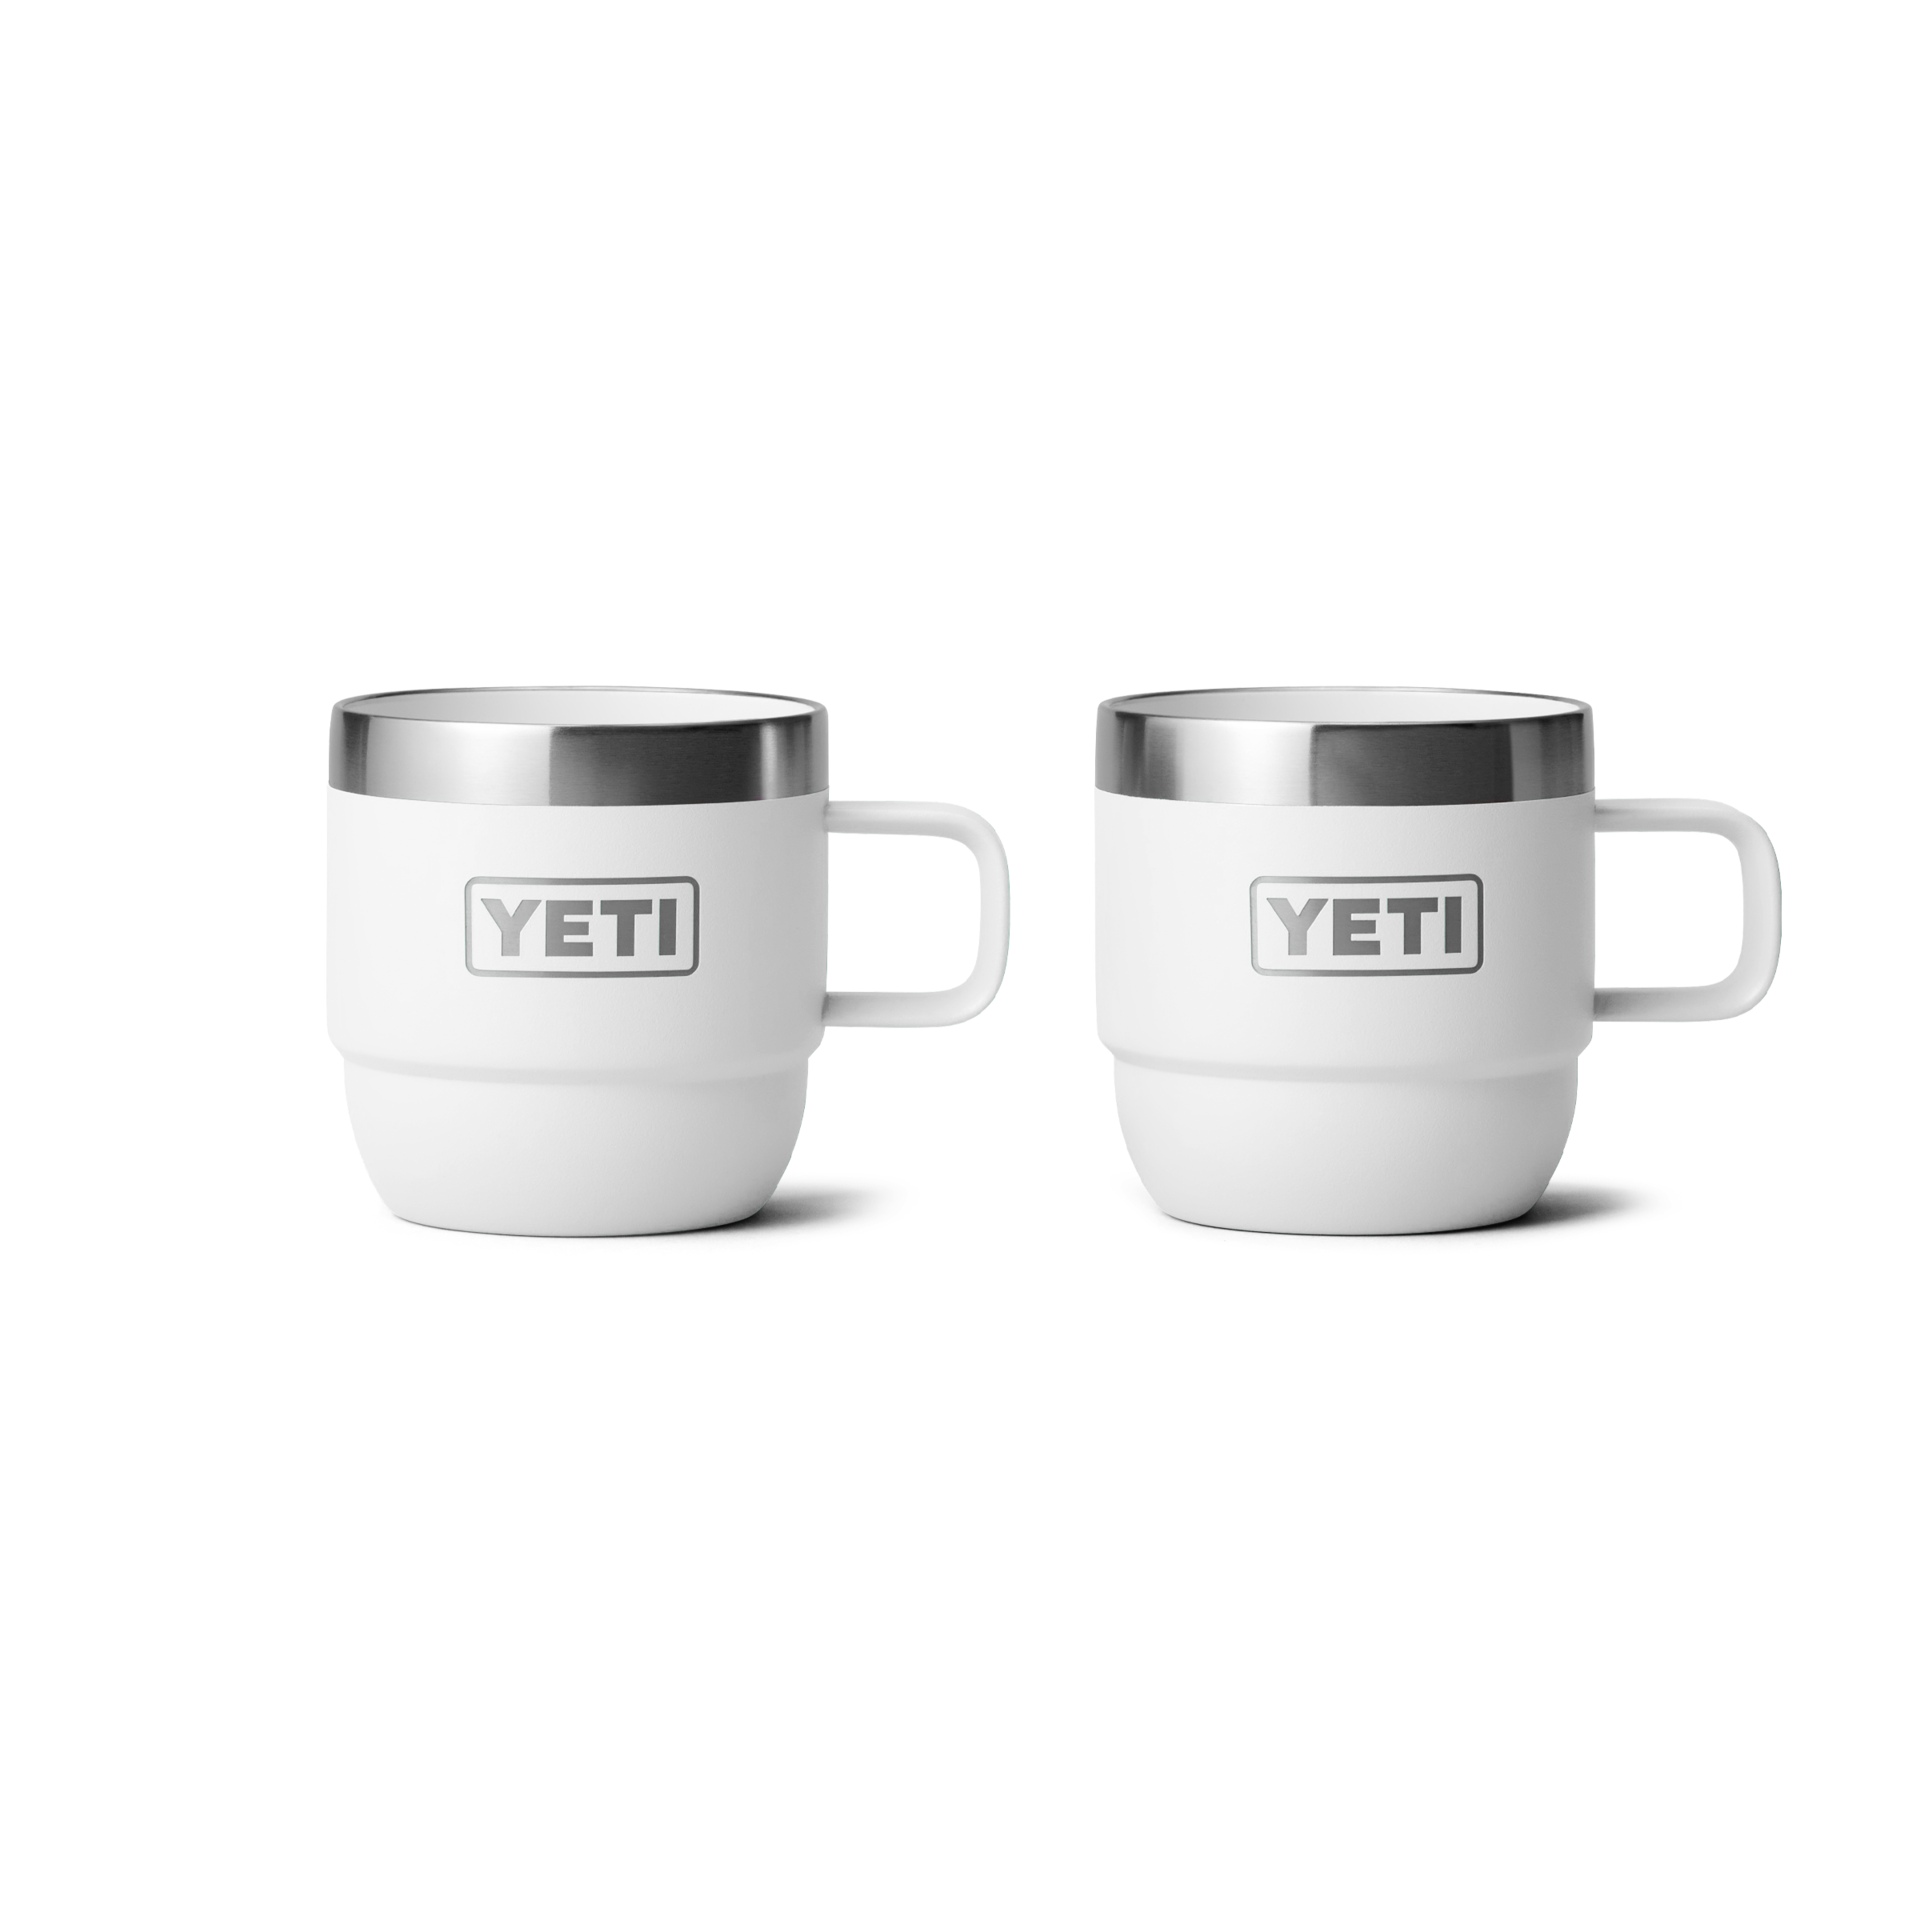 6 oz. / 177ml Stackable Mugs - White (2 pack)